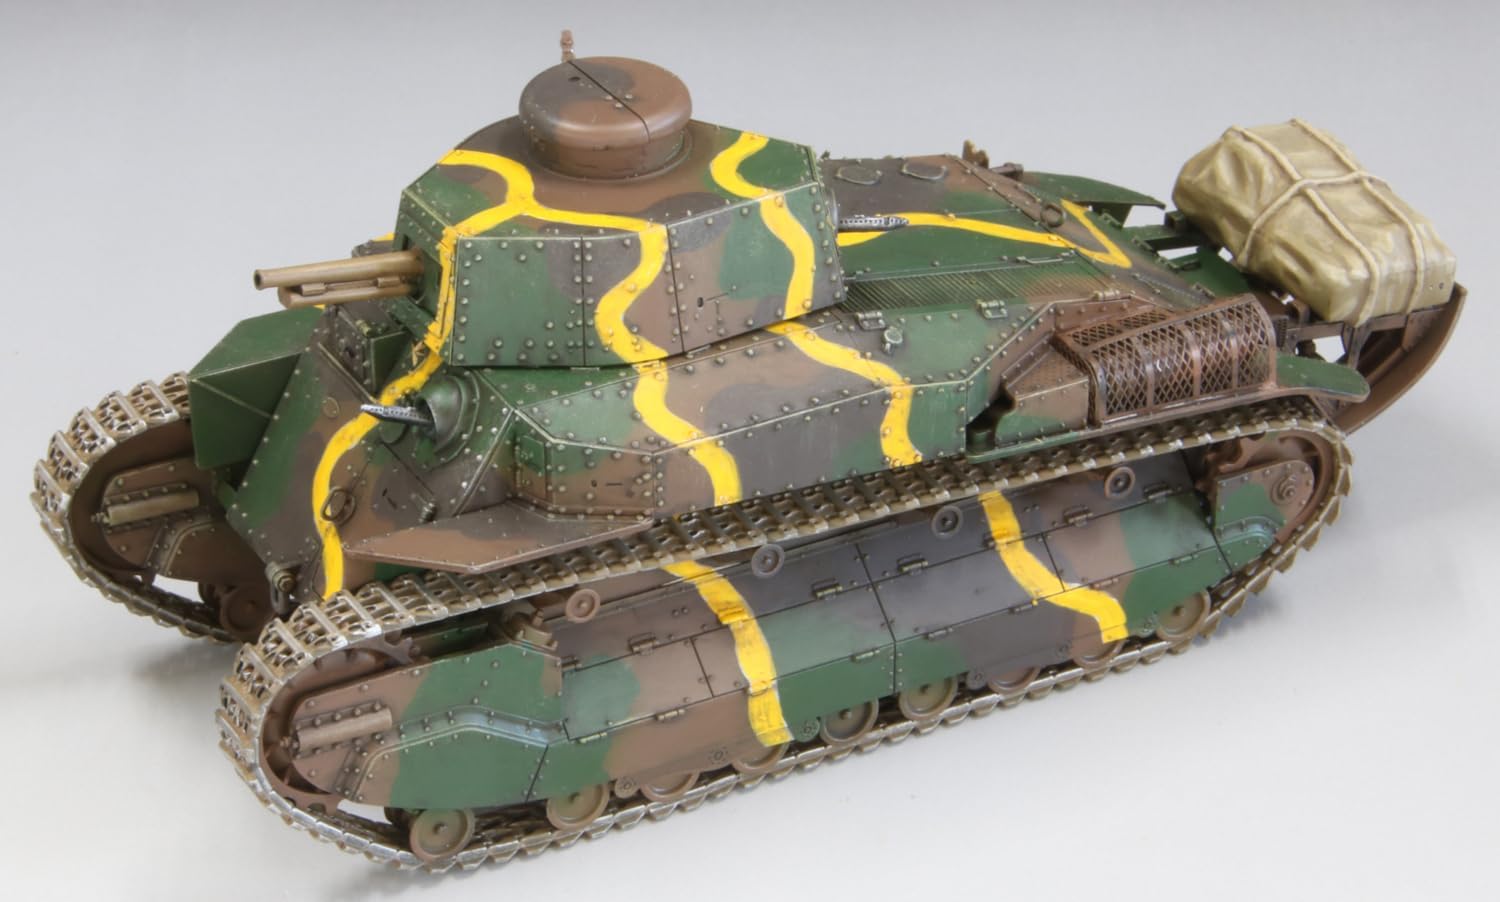 Fine Mold FM62 1/35 Military Series Imperial Army Type 89 Medium Tank, Equipped with Luggage